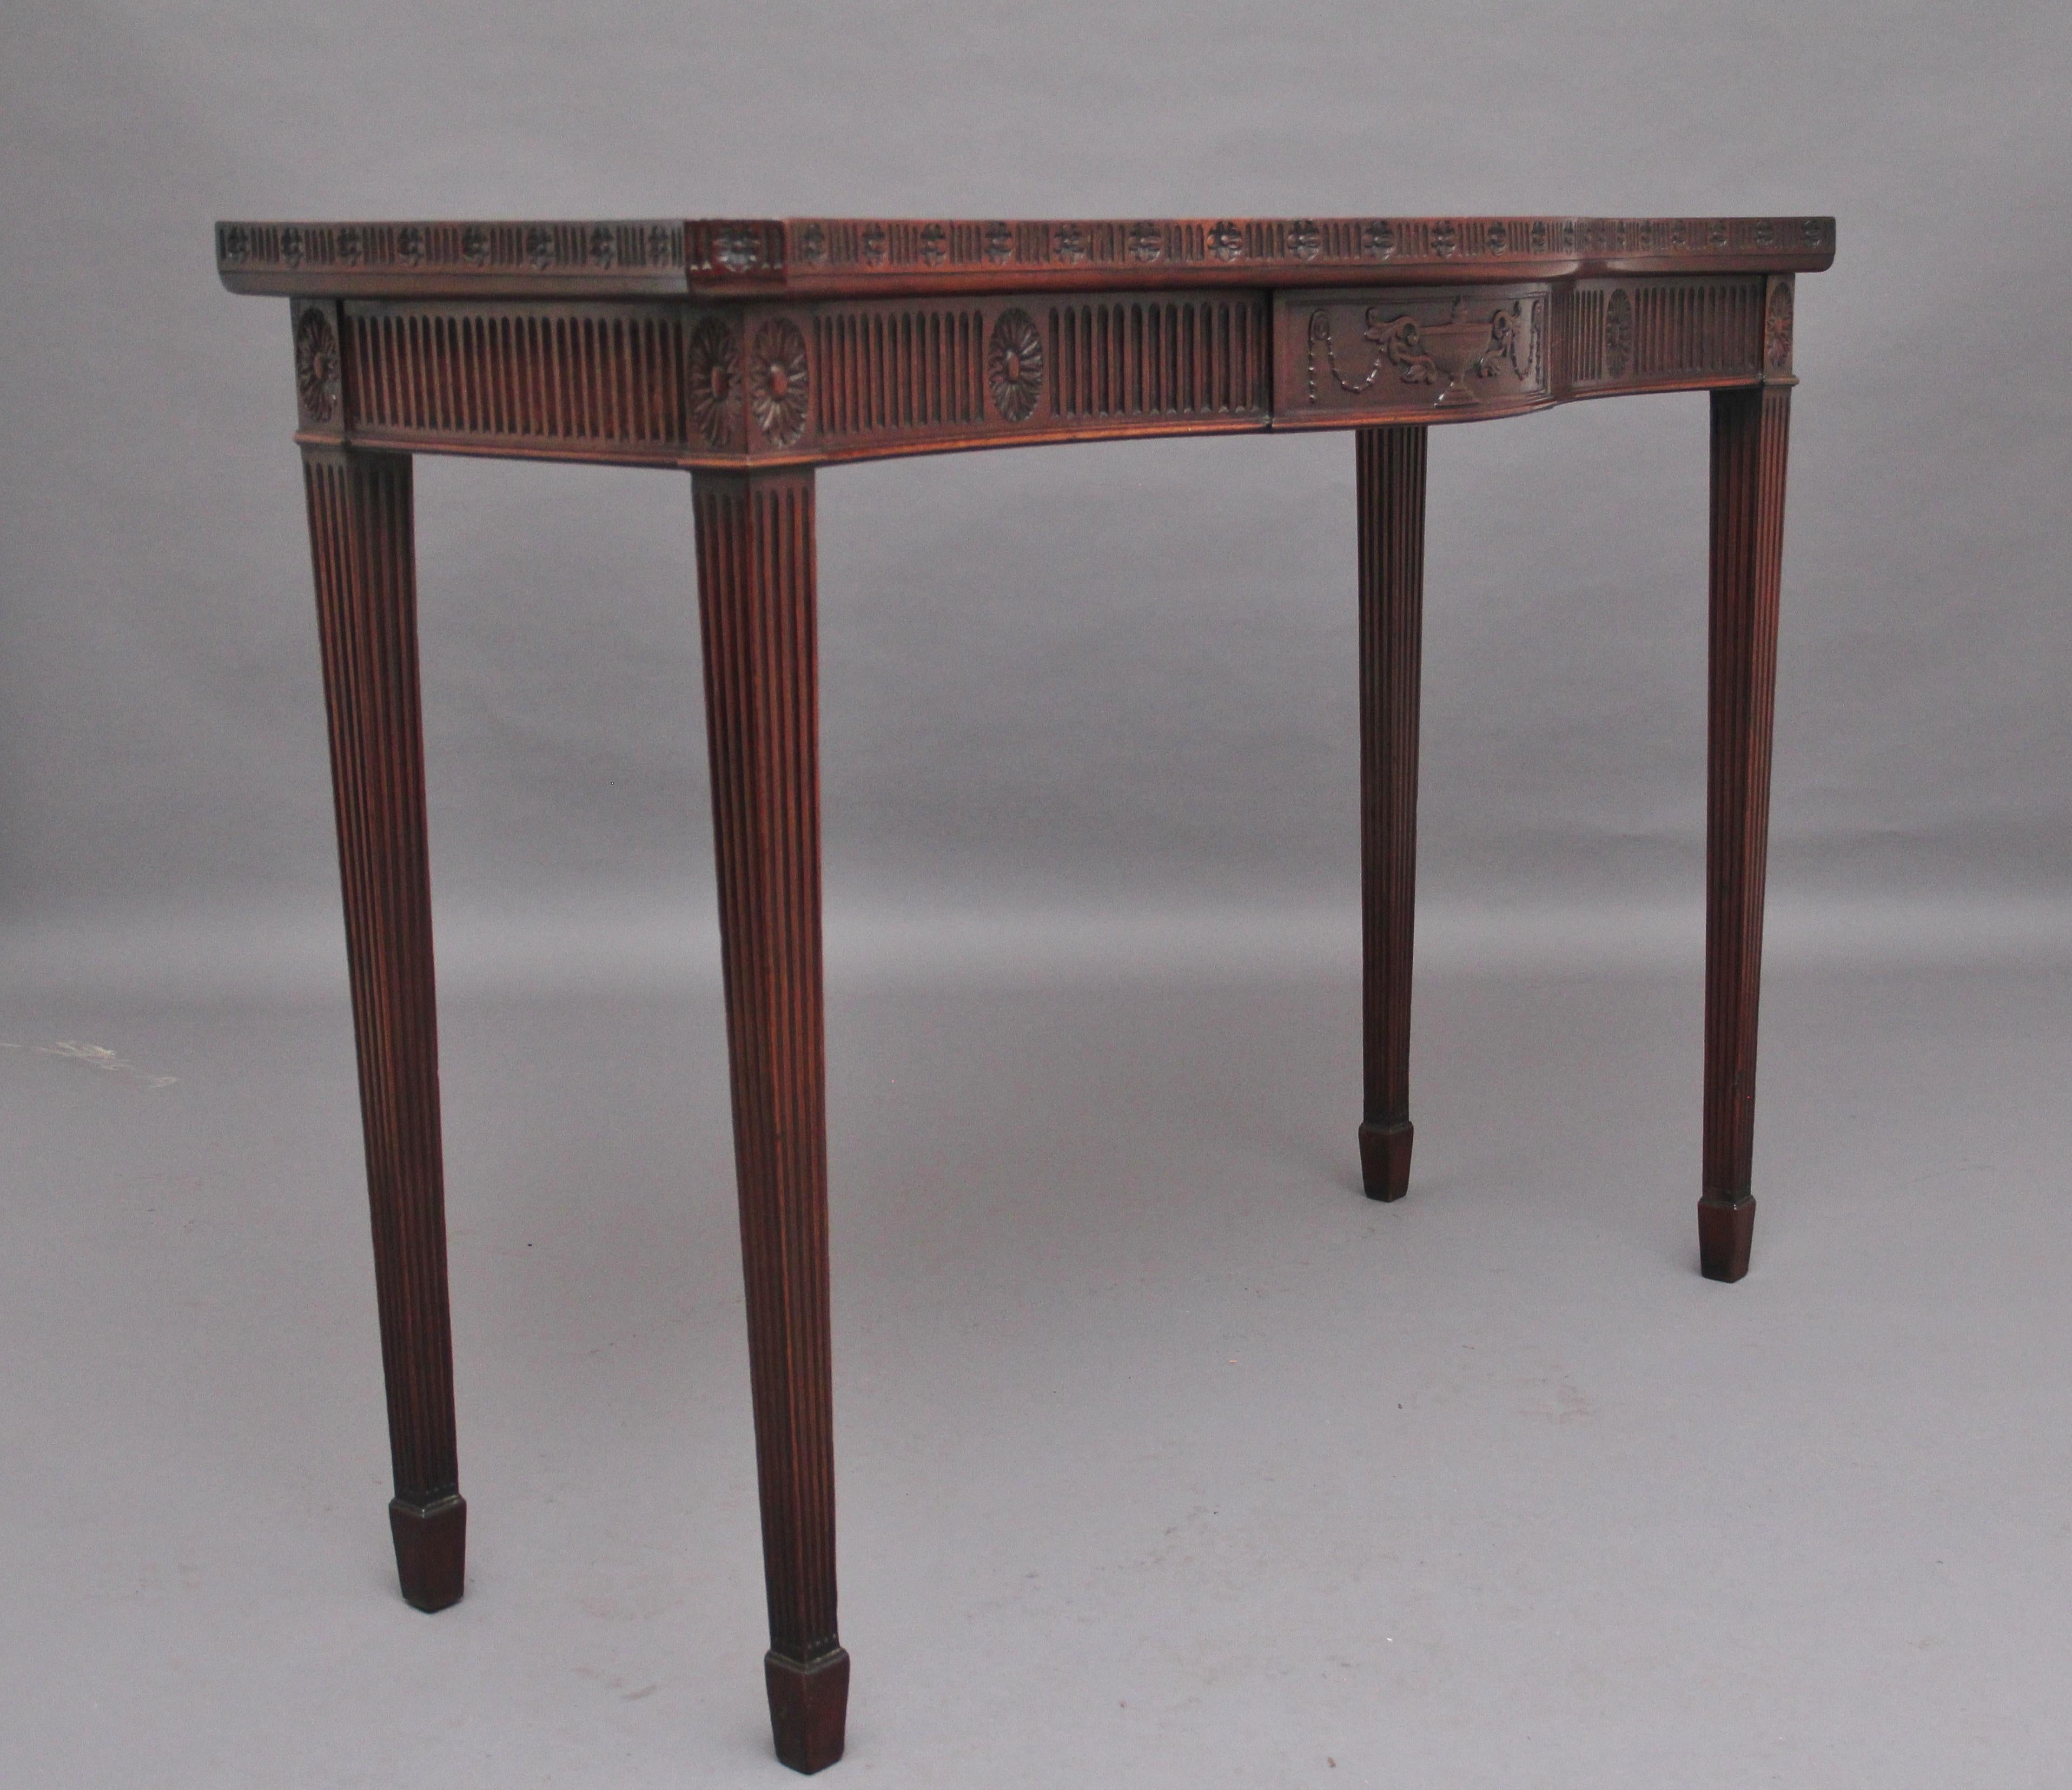 Early 20th Century mahogany serpentine console table in the Adam style, the wonderfully figured top above a fluted frieze, the frieze decorated with floral carving and a central plaque with a carved urn, the sides of the serving table has the same